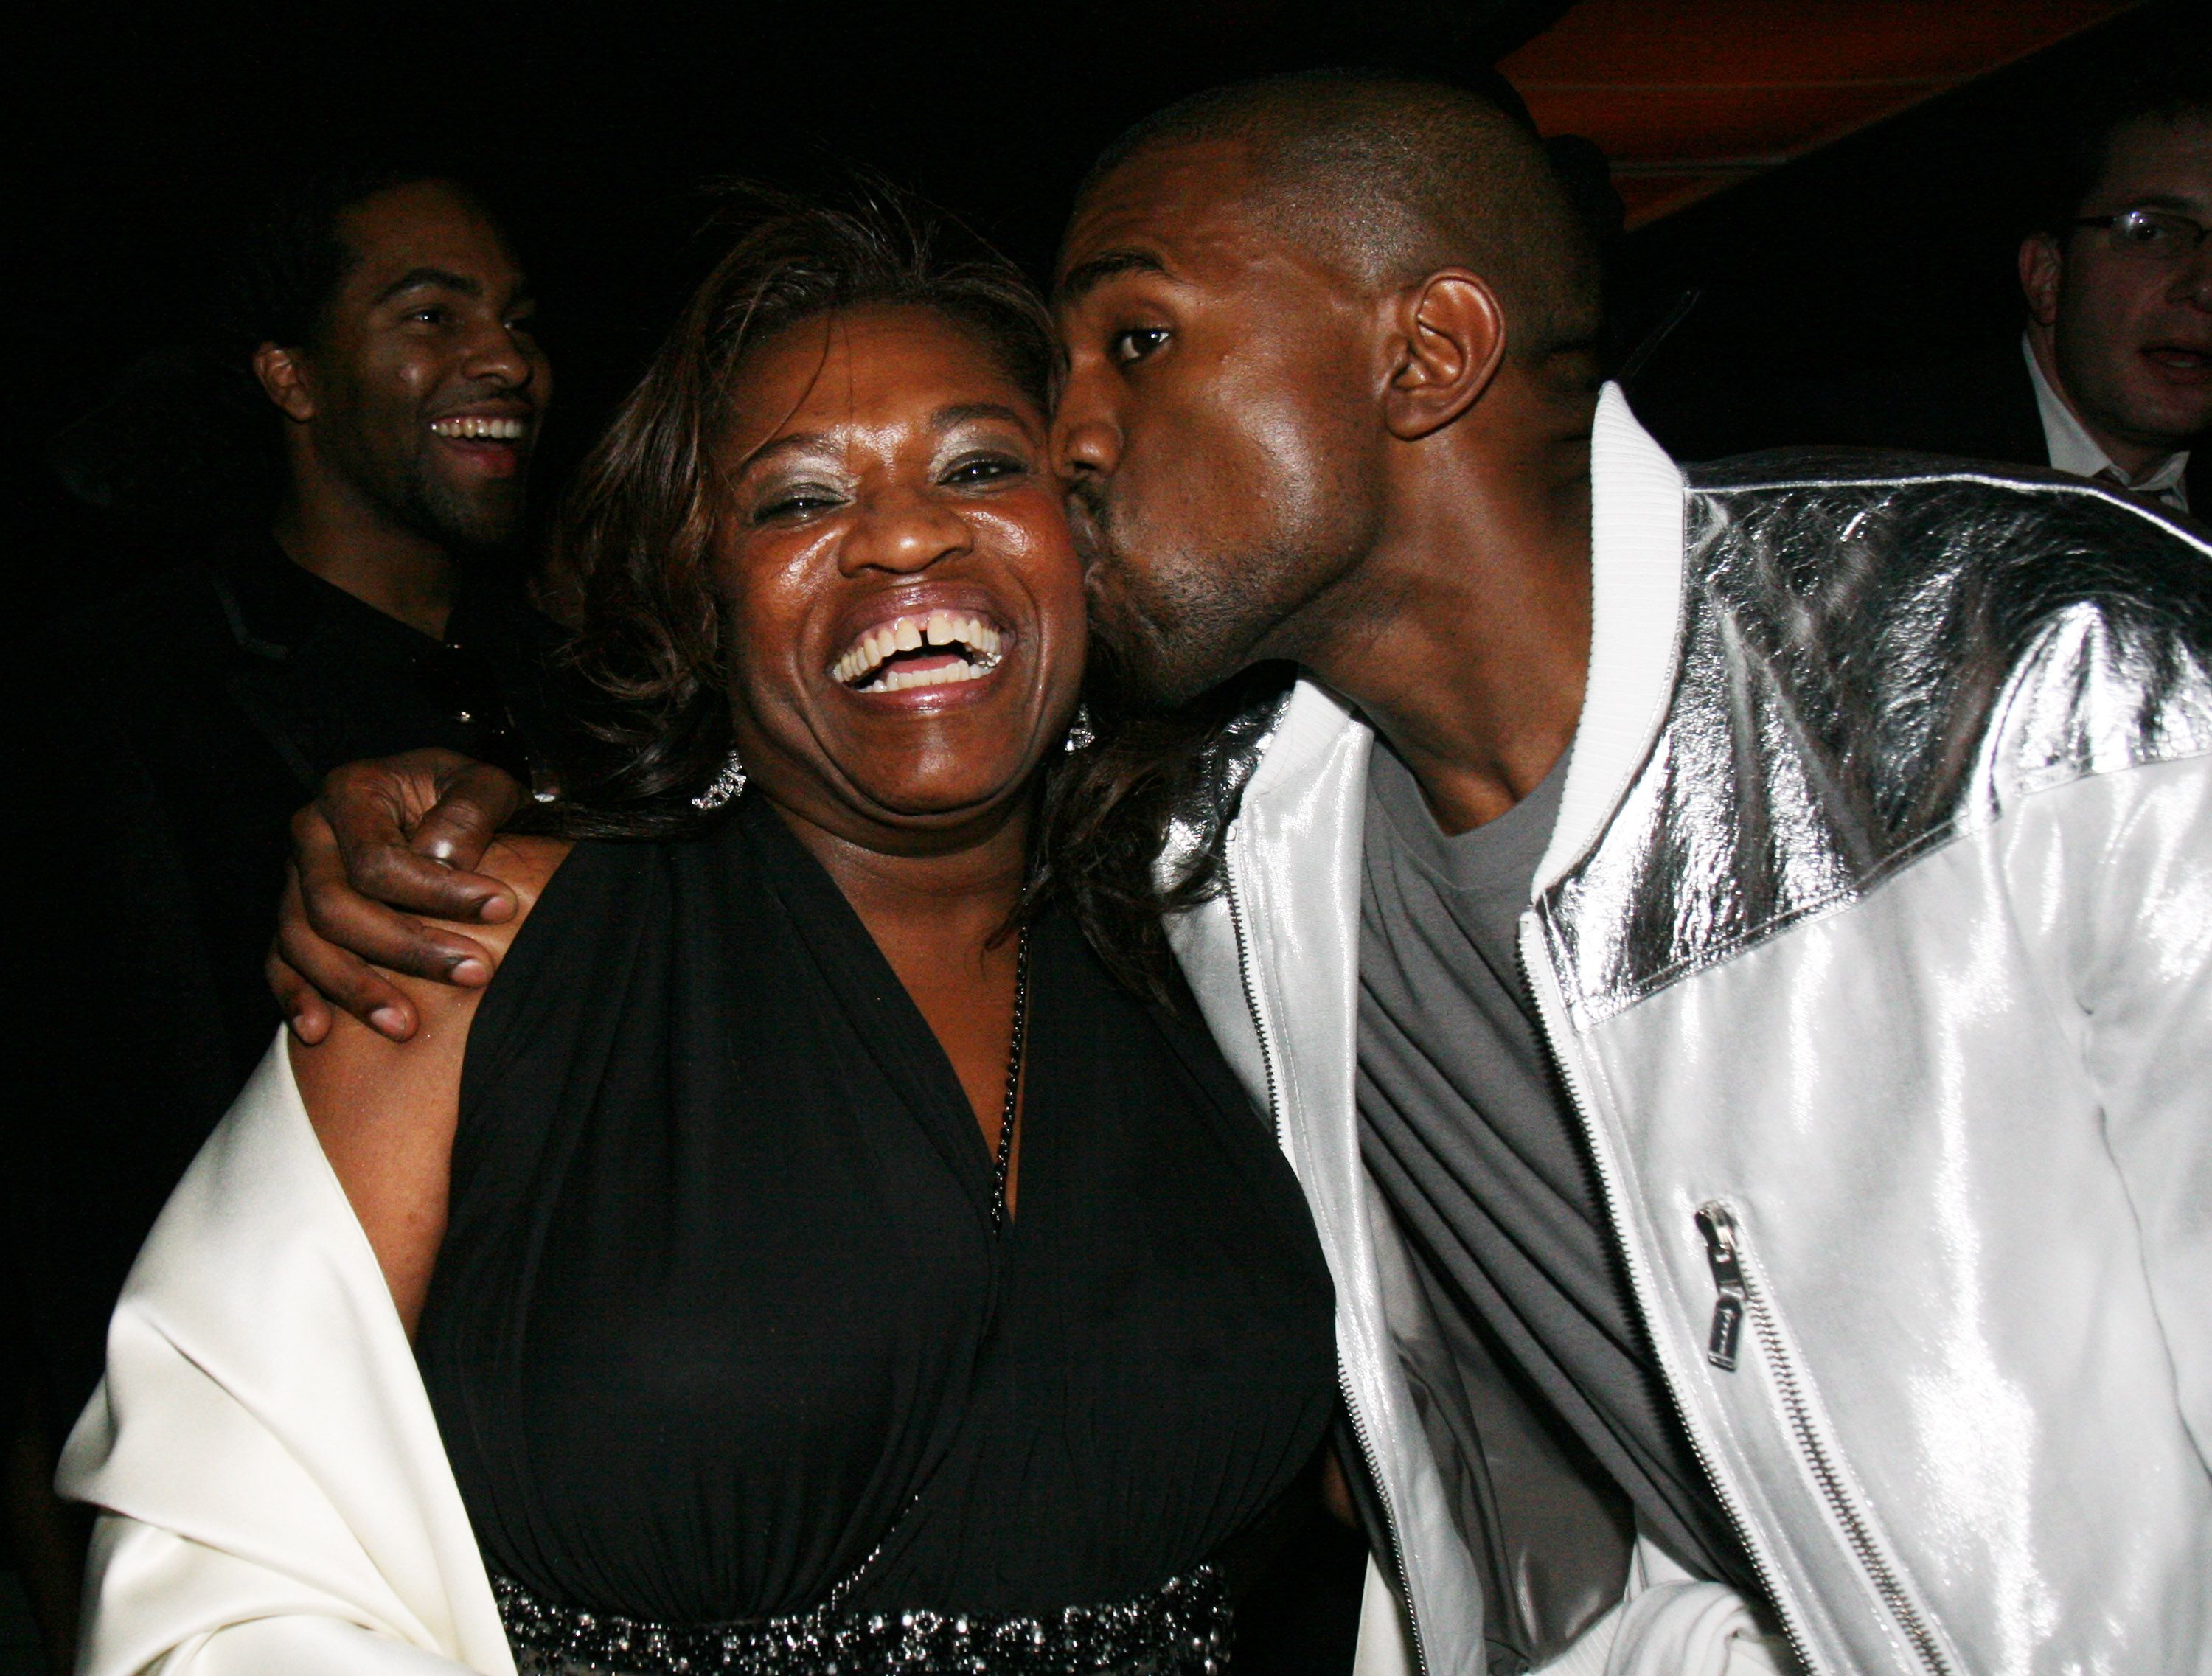 Donda West and Kanye West at Queen Latifah's post GRAMMYs party in February 2007 | Source: Getty Images